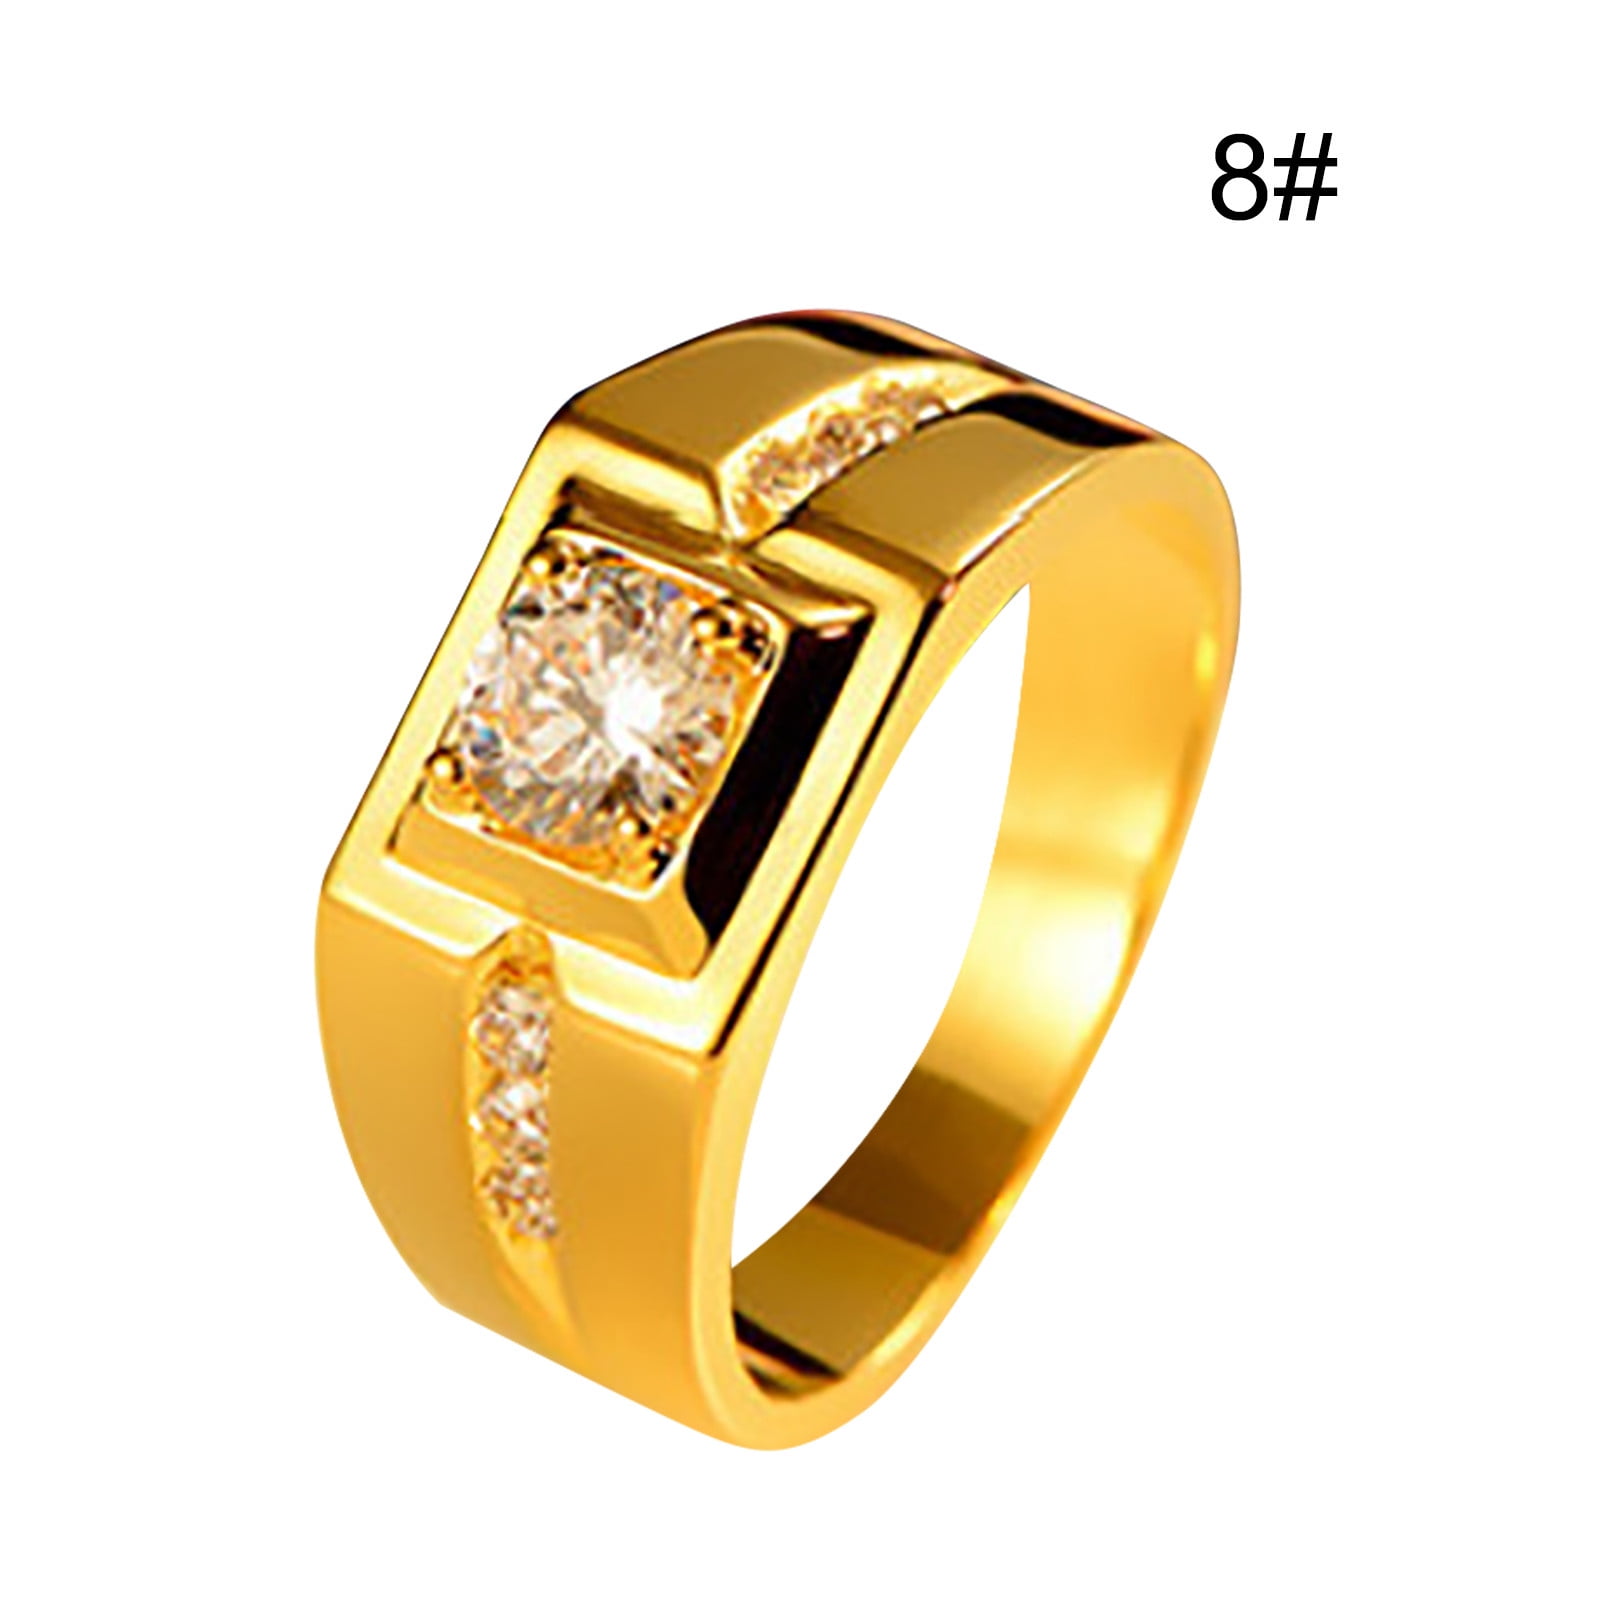 Karat vs Carat? What Is the Difference? - Learn About Gold